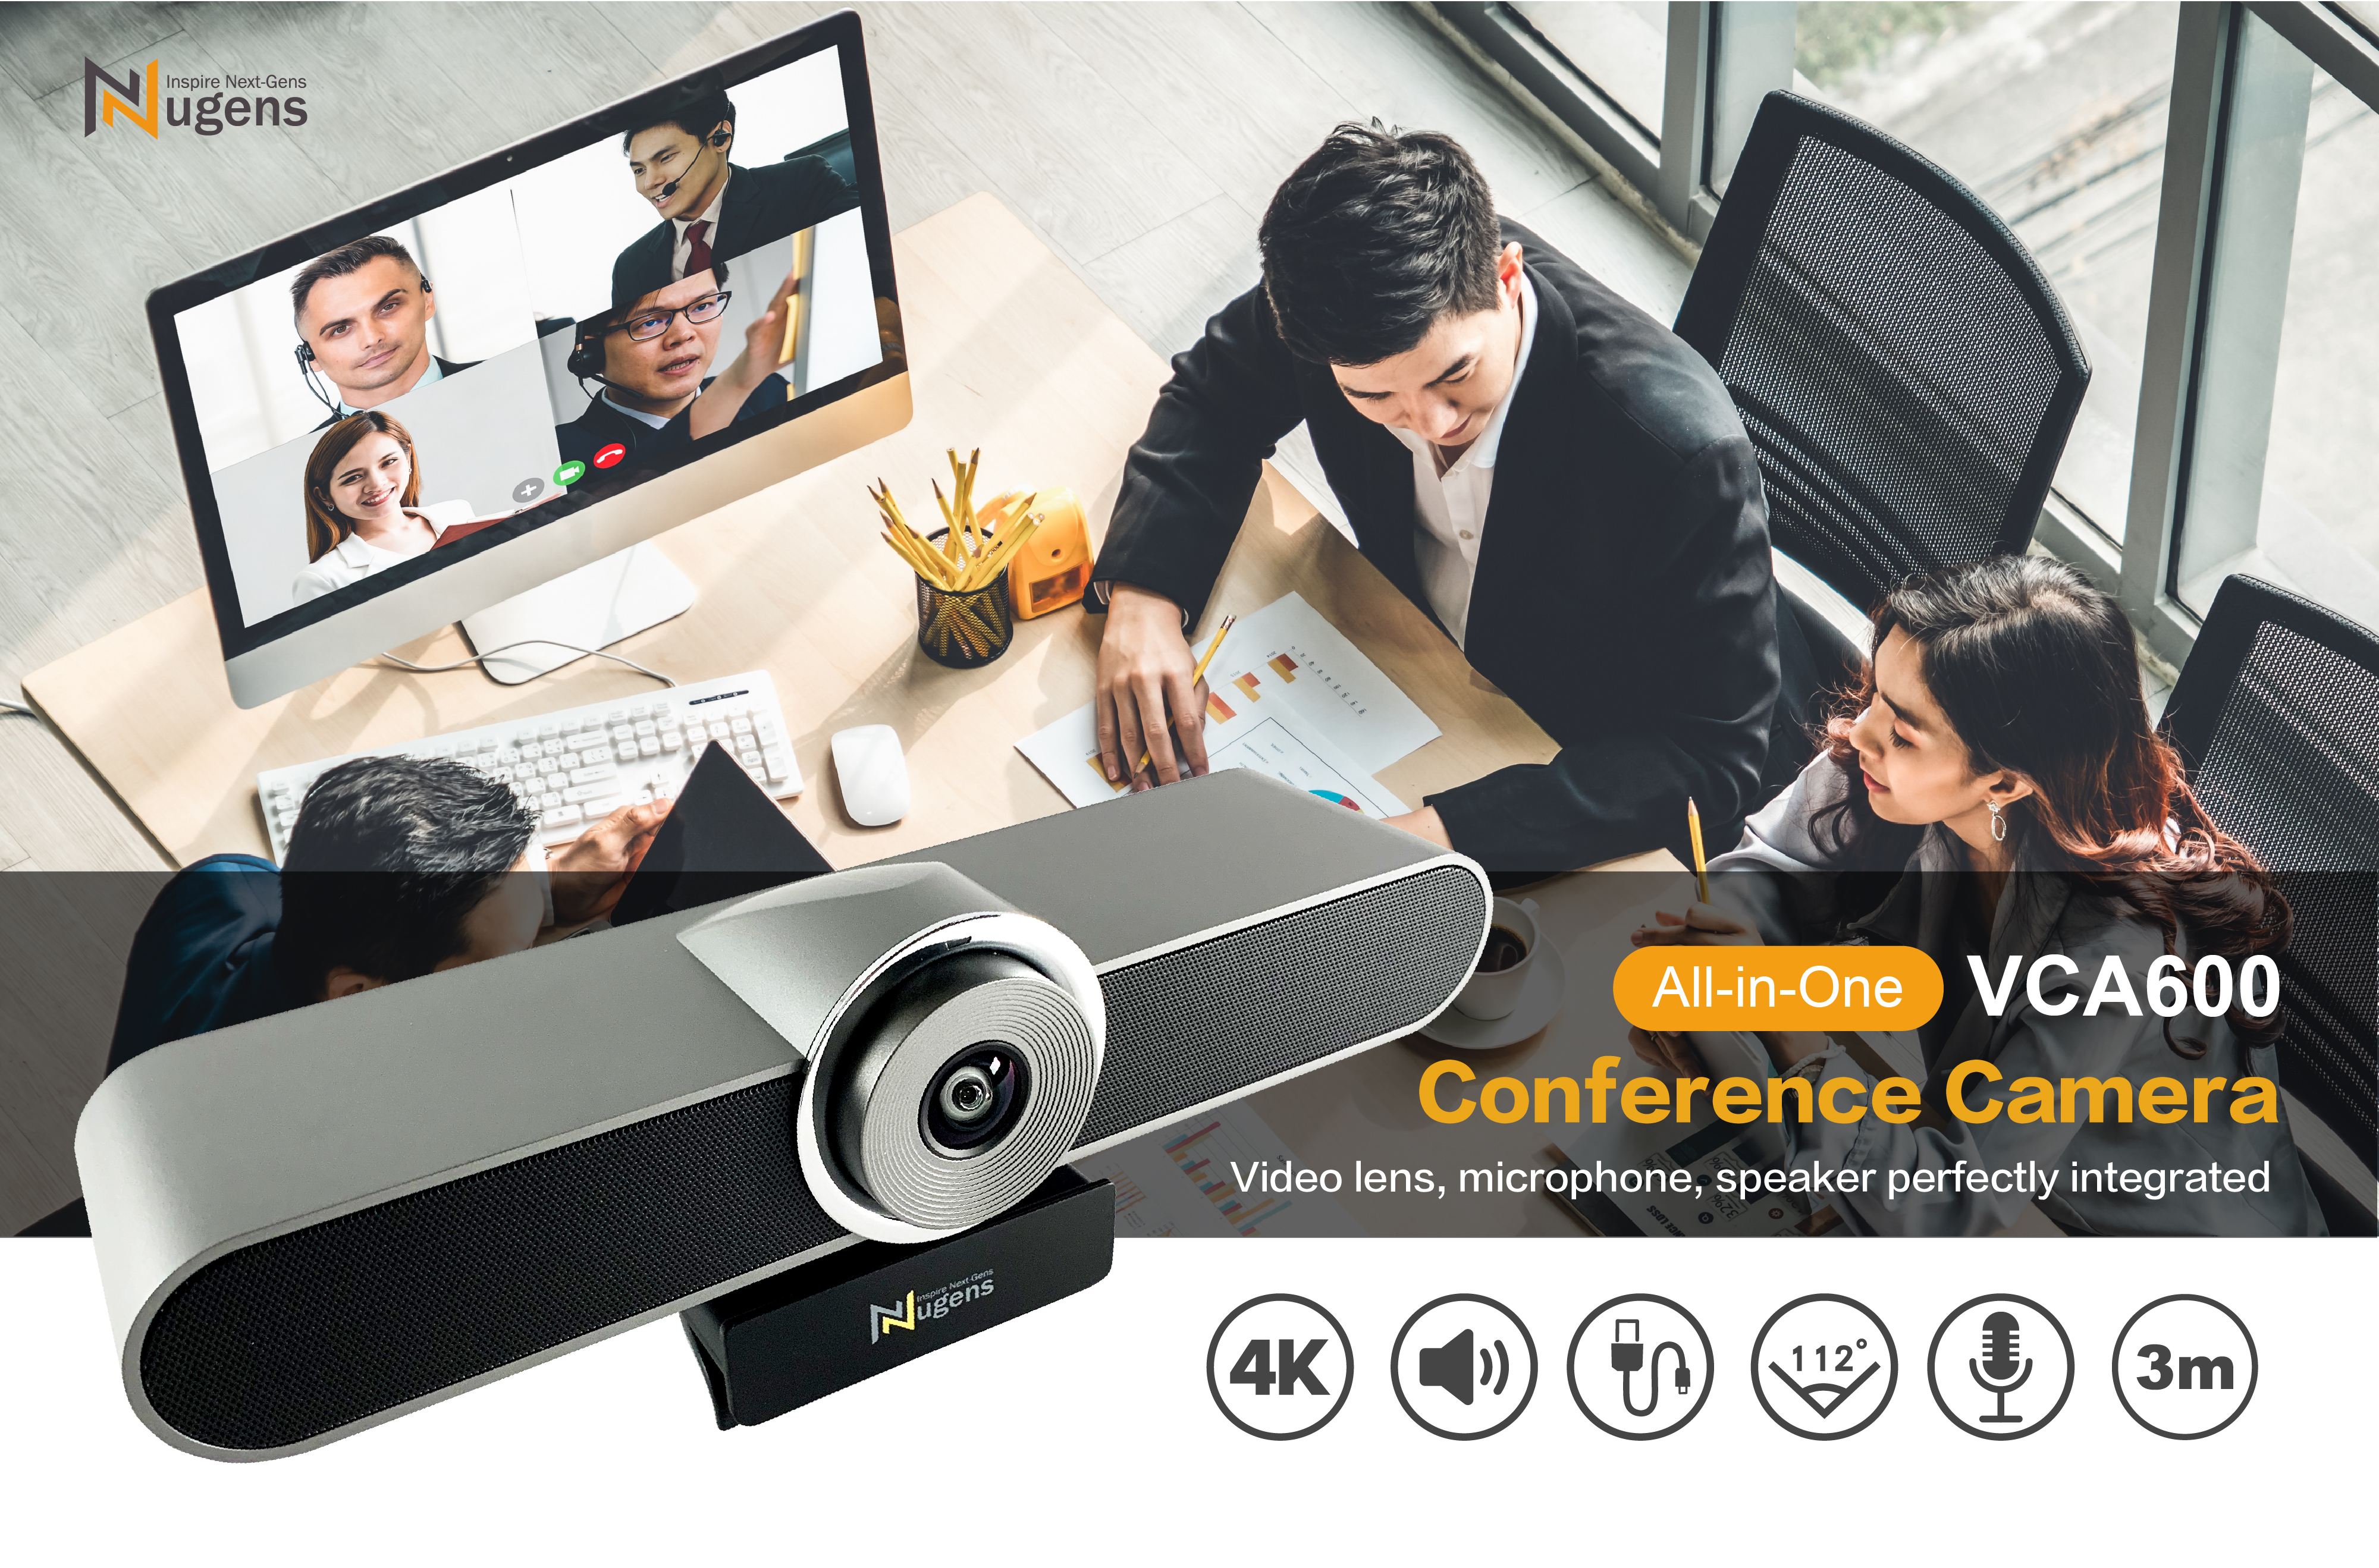 VCA600 All-in-One 4K Conference Camera